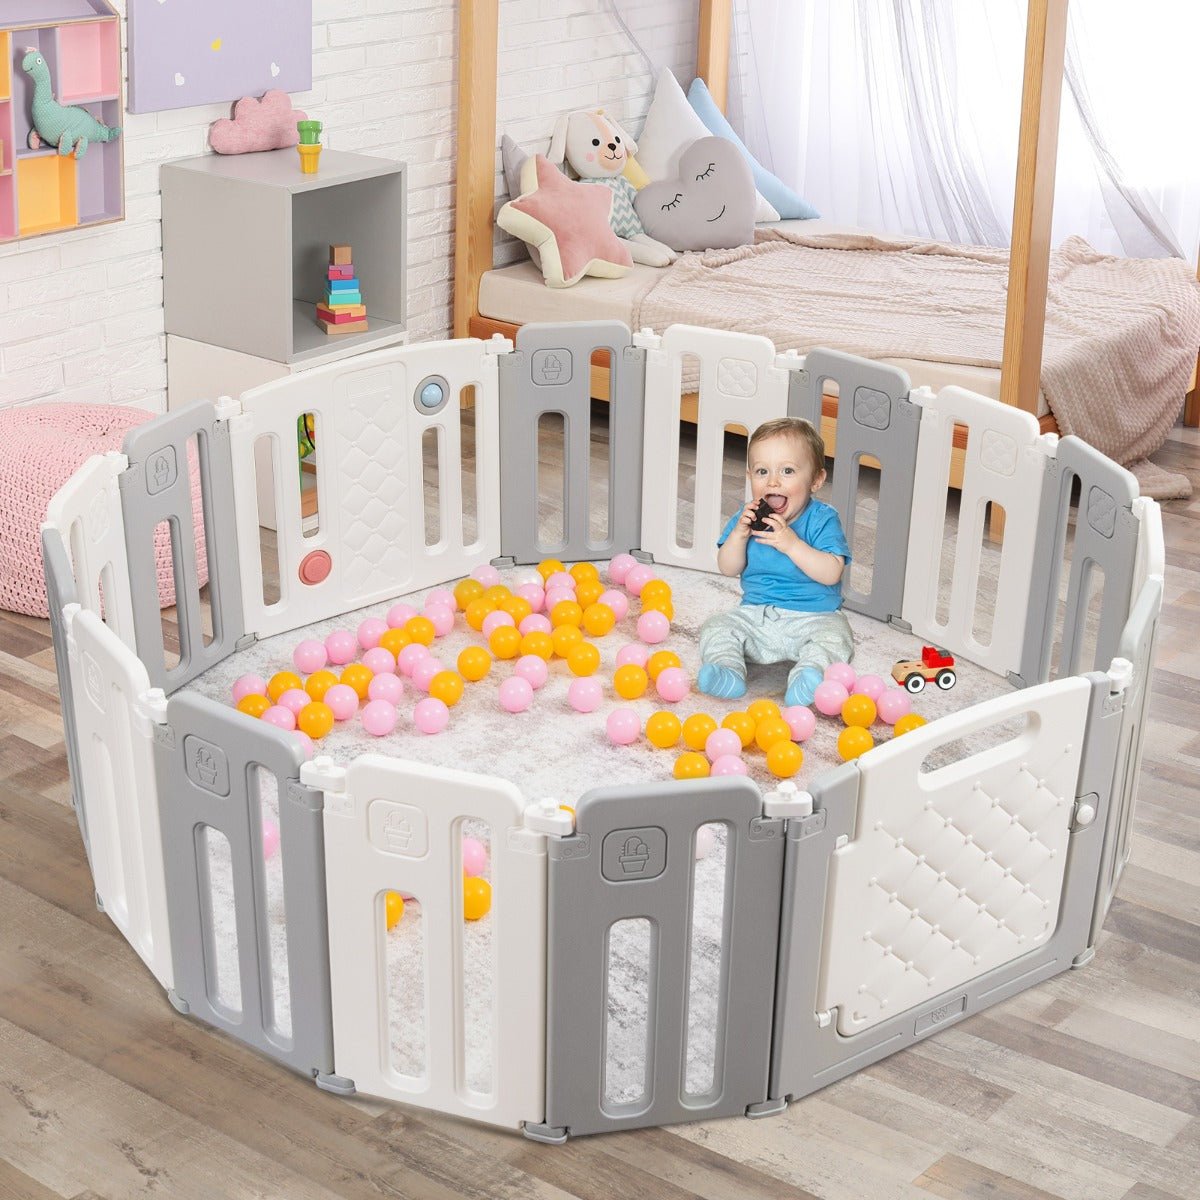 16-Panel Playpen with Lock for Safe Toddler Fun